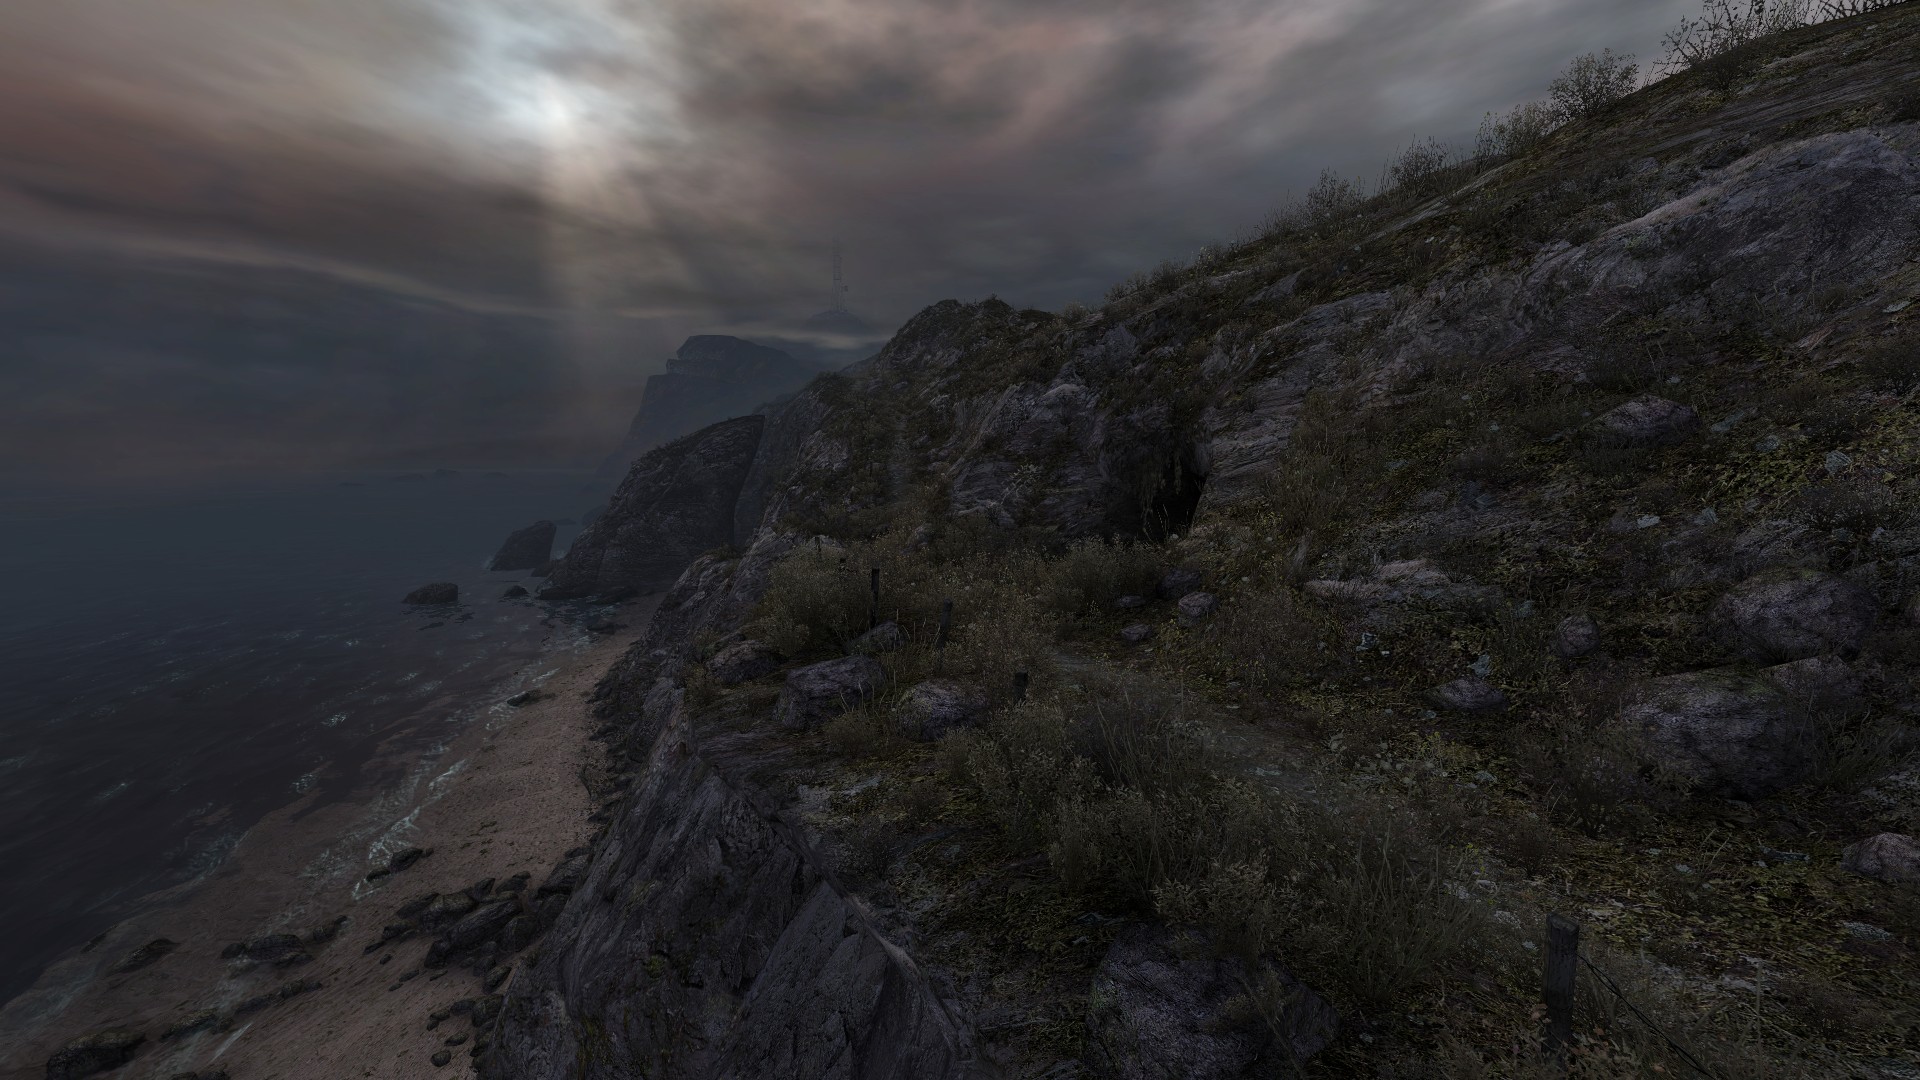 Dear Esther – Interview with Dan Pinchbeck of The Chinese Room